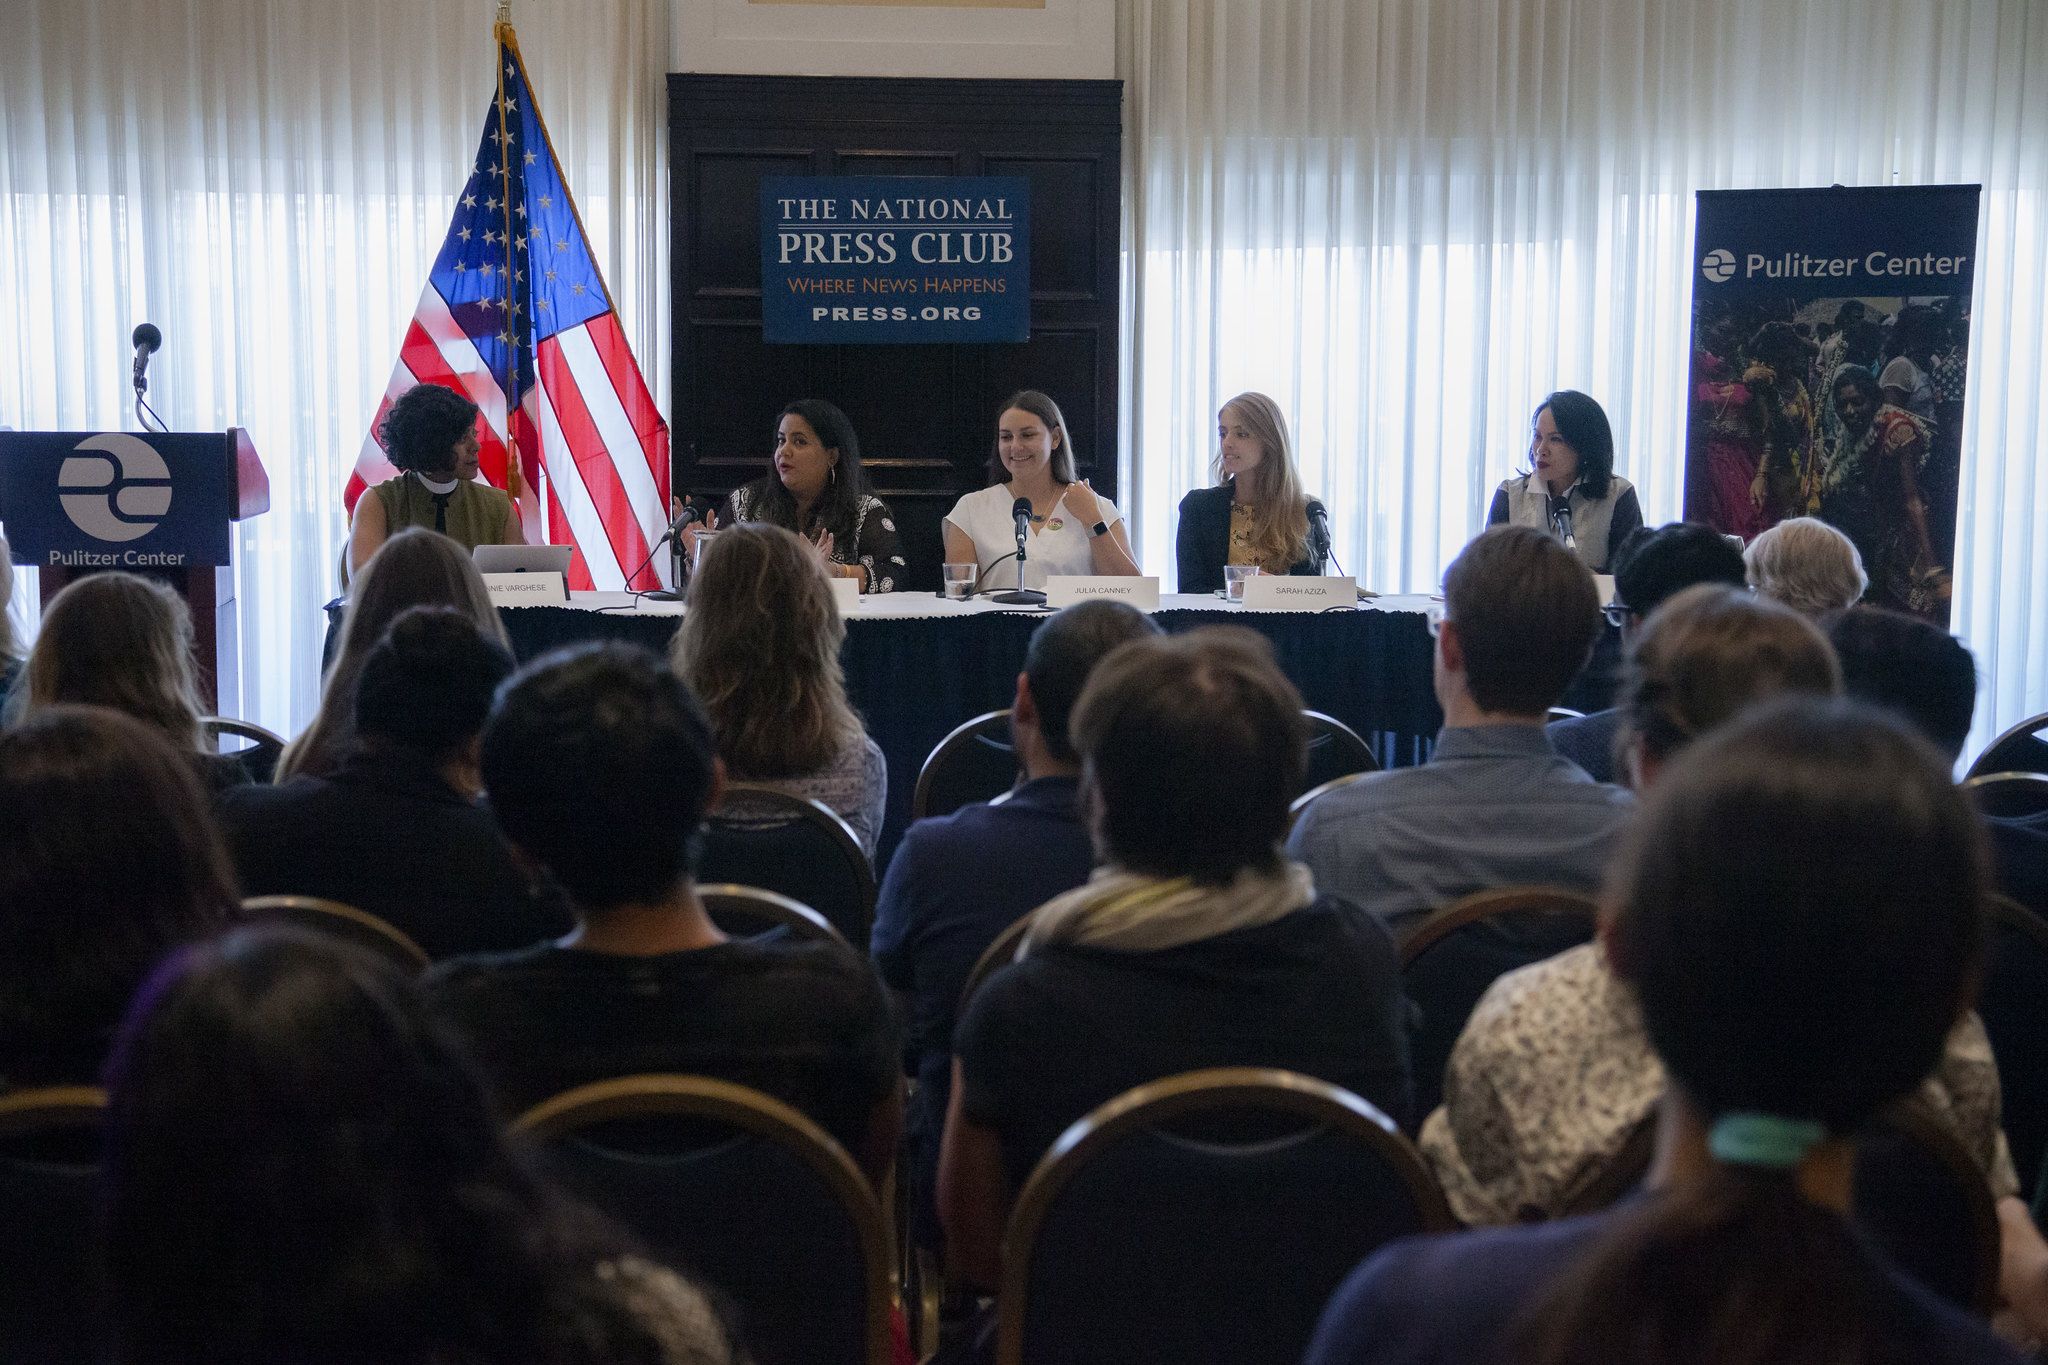 Pulitzer Center grantees discuss the intersectionality of gender and religion at the Beyond Religion conference. The panelists from left to right are: Winnie Varghese (moderator), Aarti Singh, Julia Canney, Sarah Aziza, and Ana Santos. Image by Jin Ding. Washington, D.C., 2019.